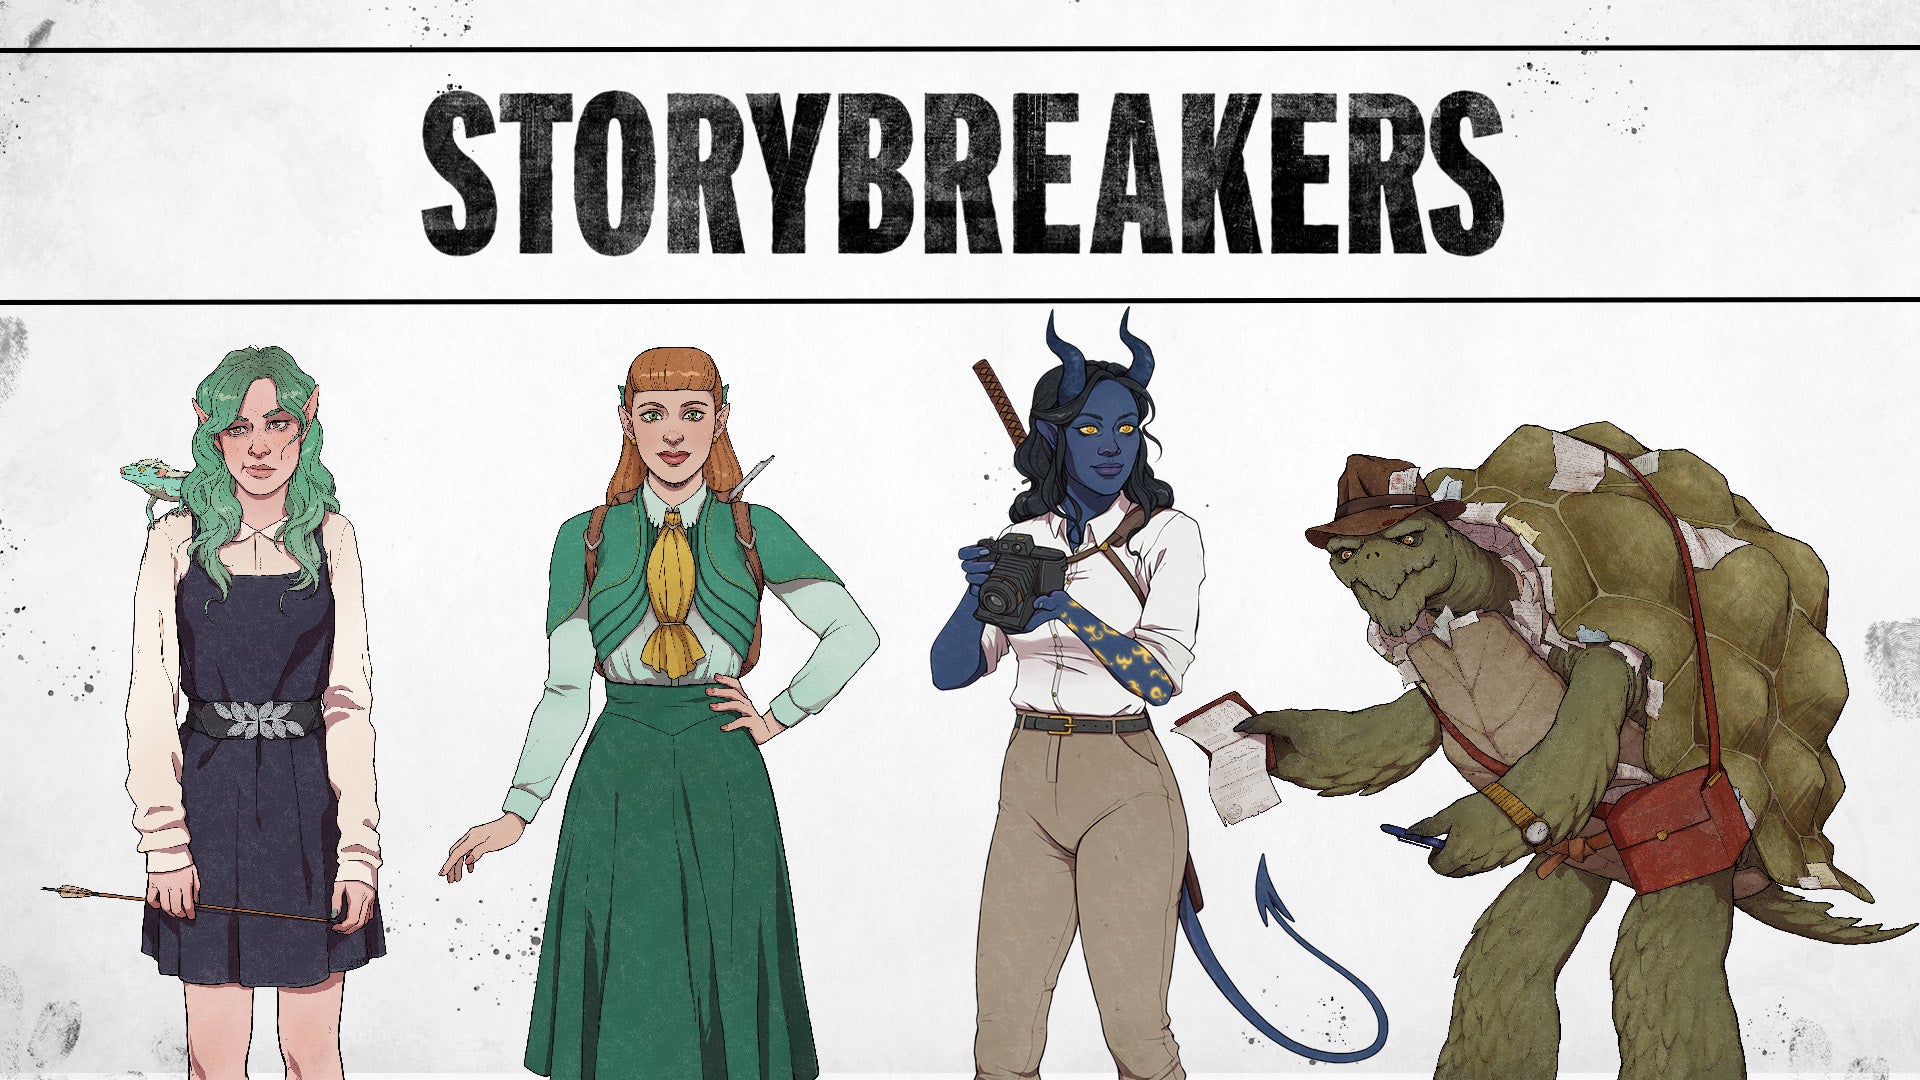 The four Storybreakers characters stand below the Storybreakers logo